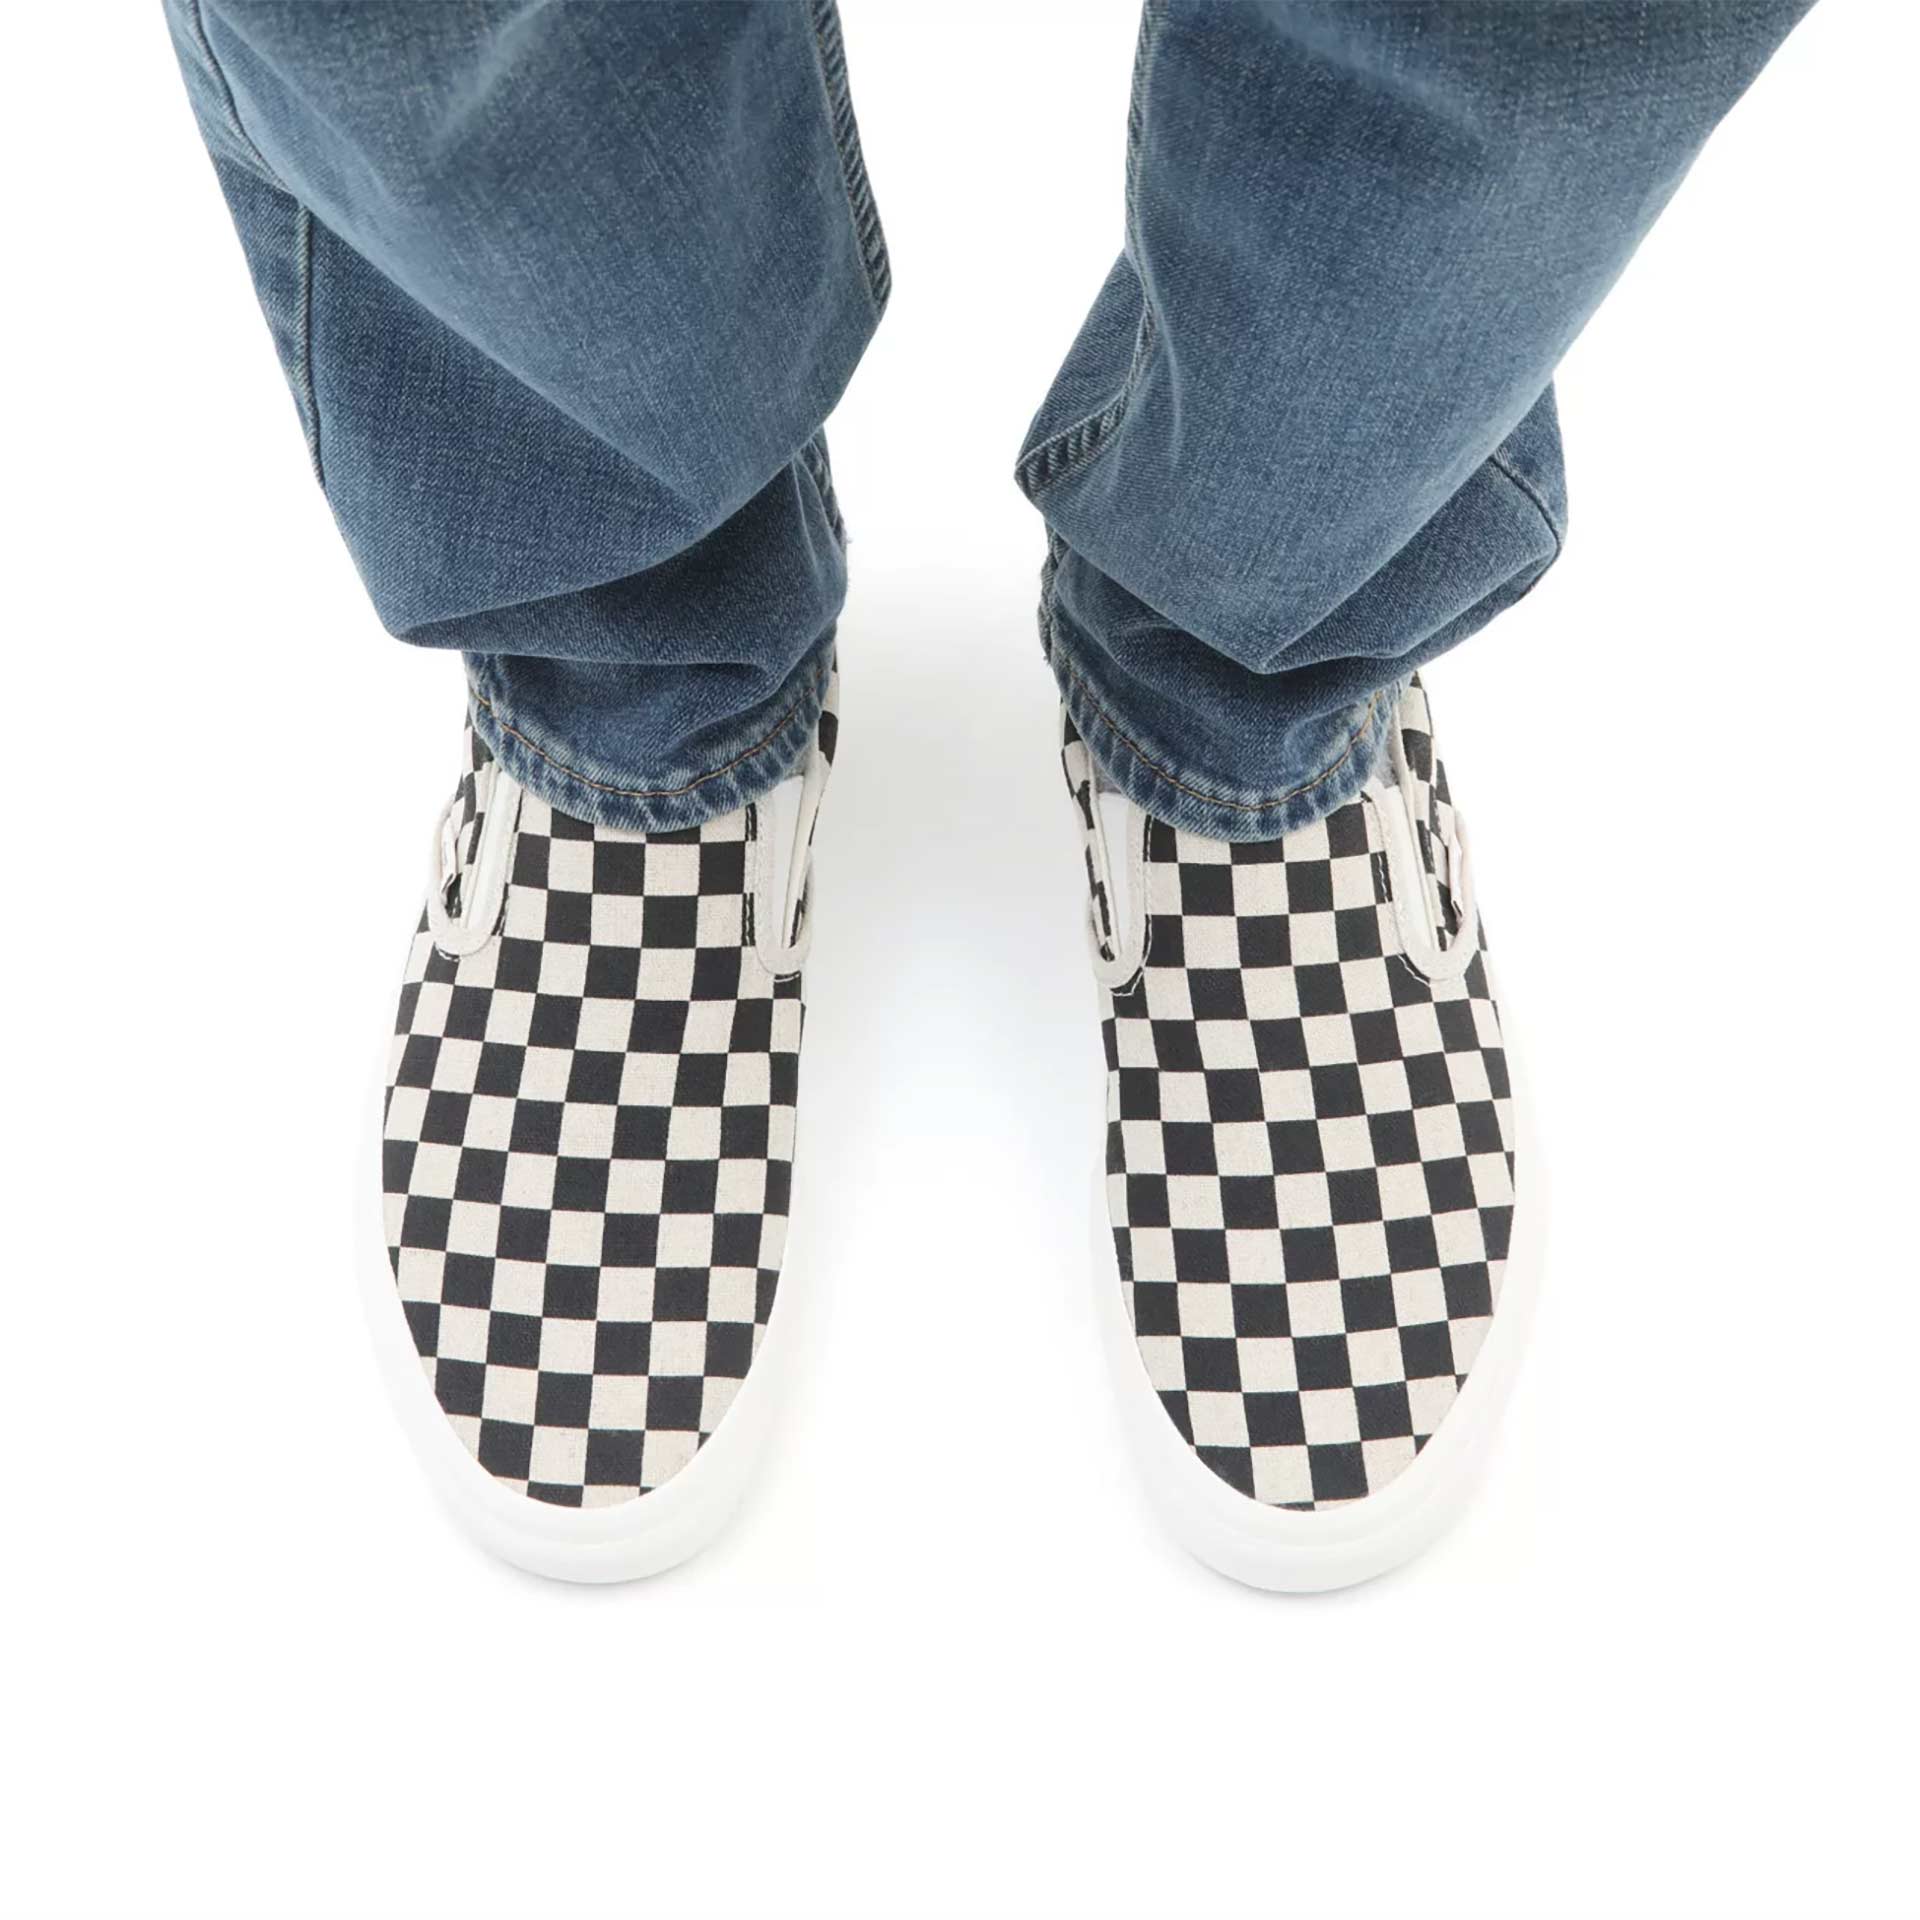 Vans Classic Slip-On Eco Theory Checkerboard Black/White 07